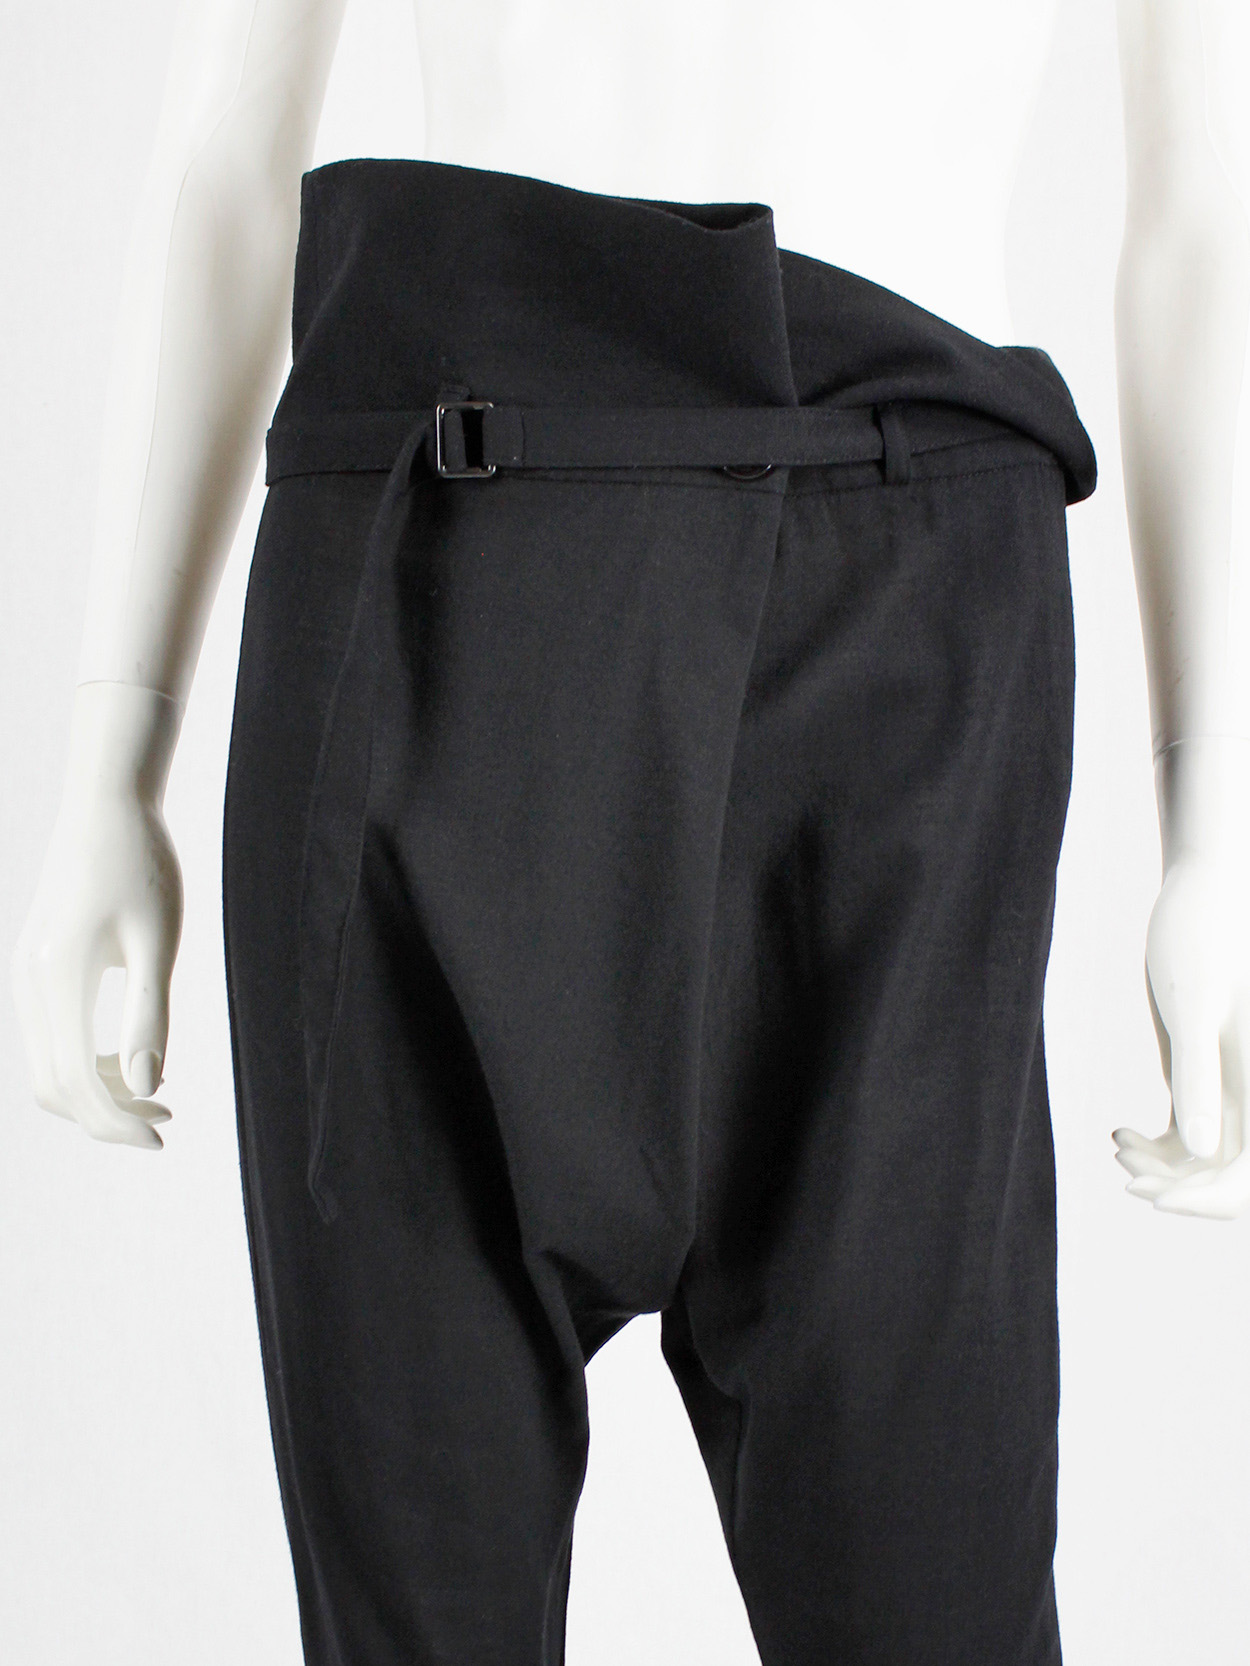 vaniitas Ann Demeulemeester black harem trousers with blet strap and front pleat (9)